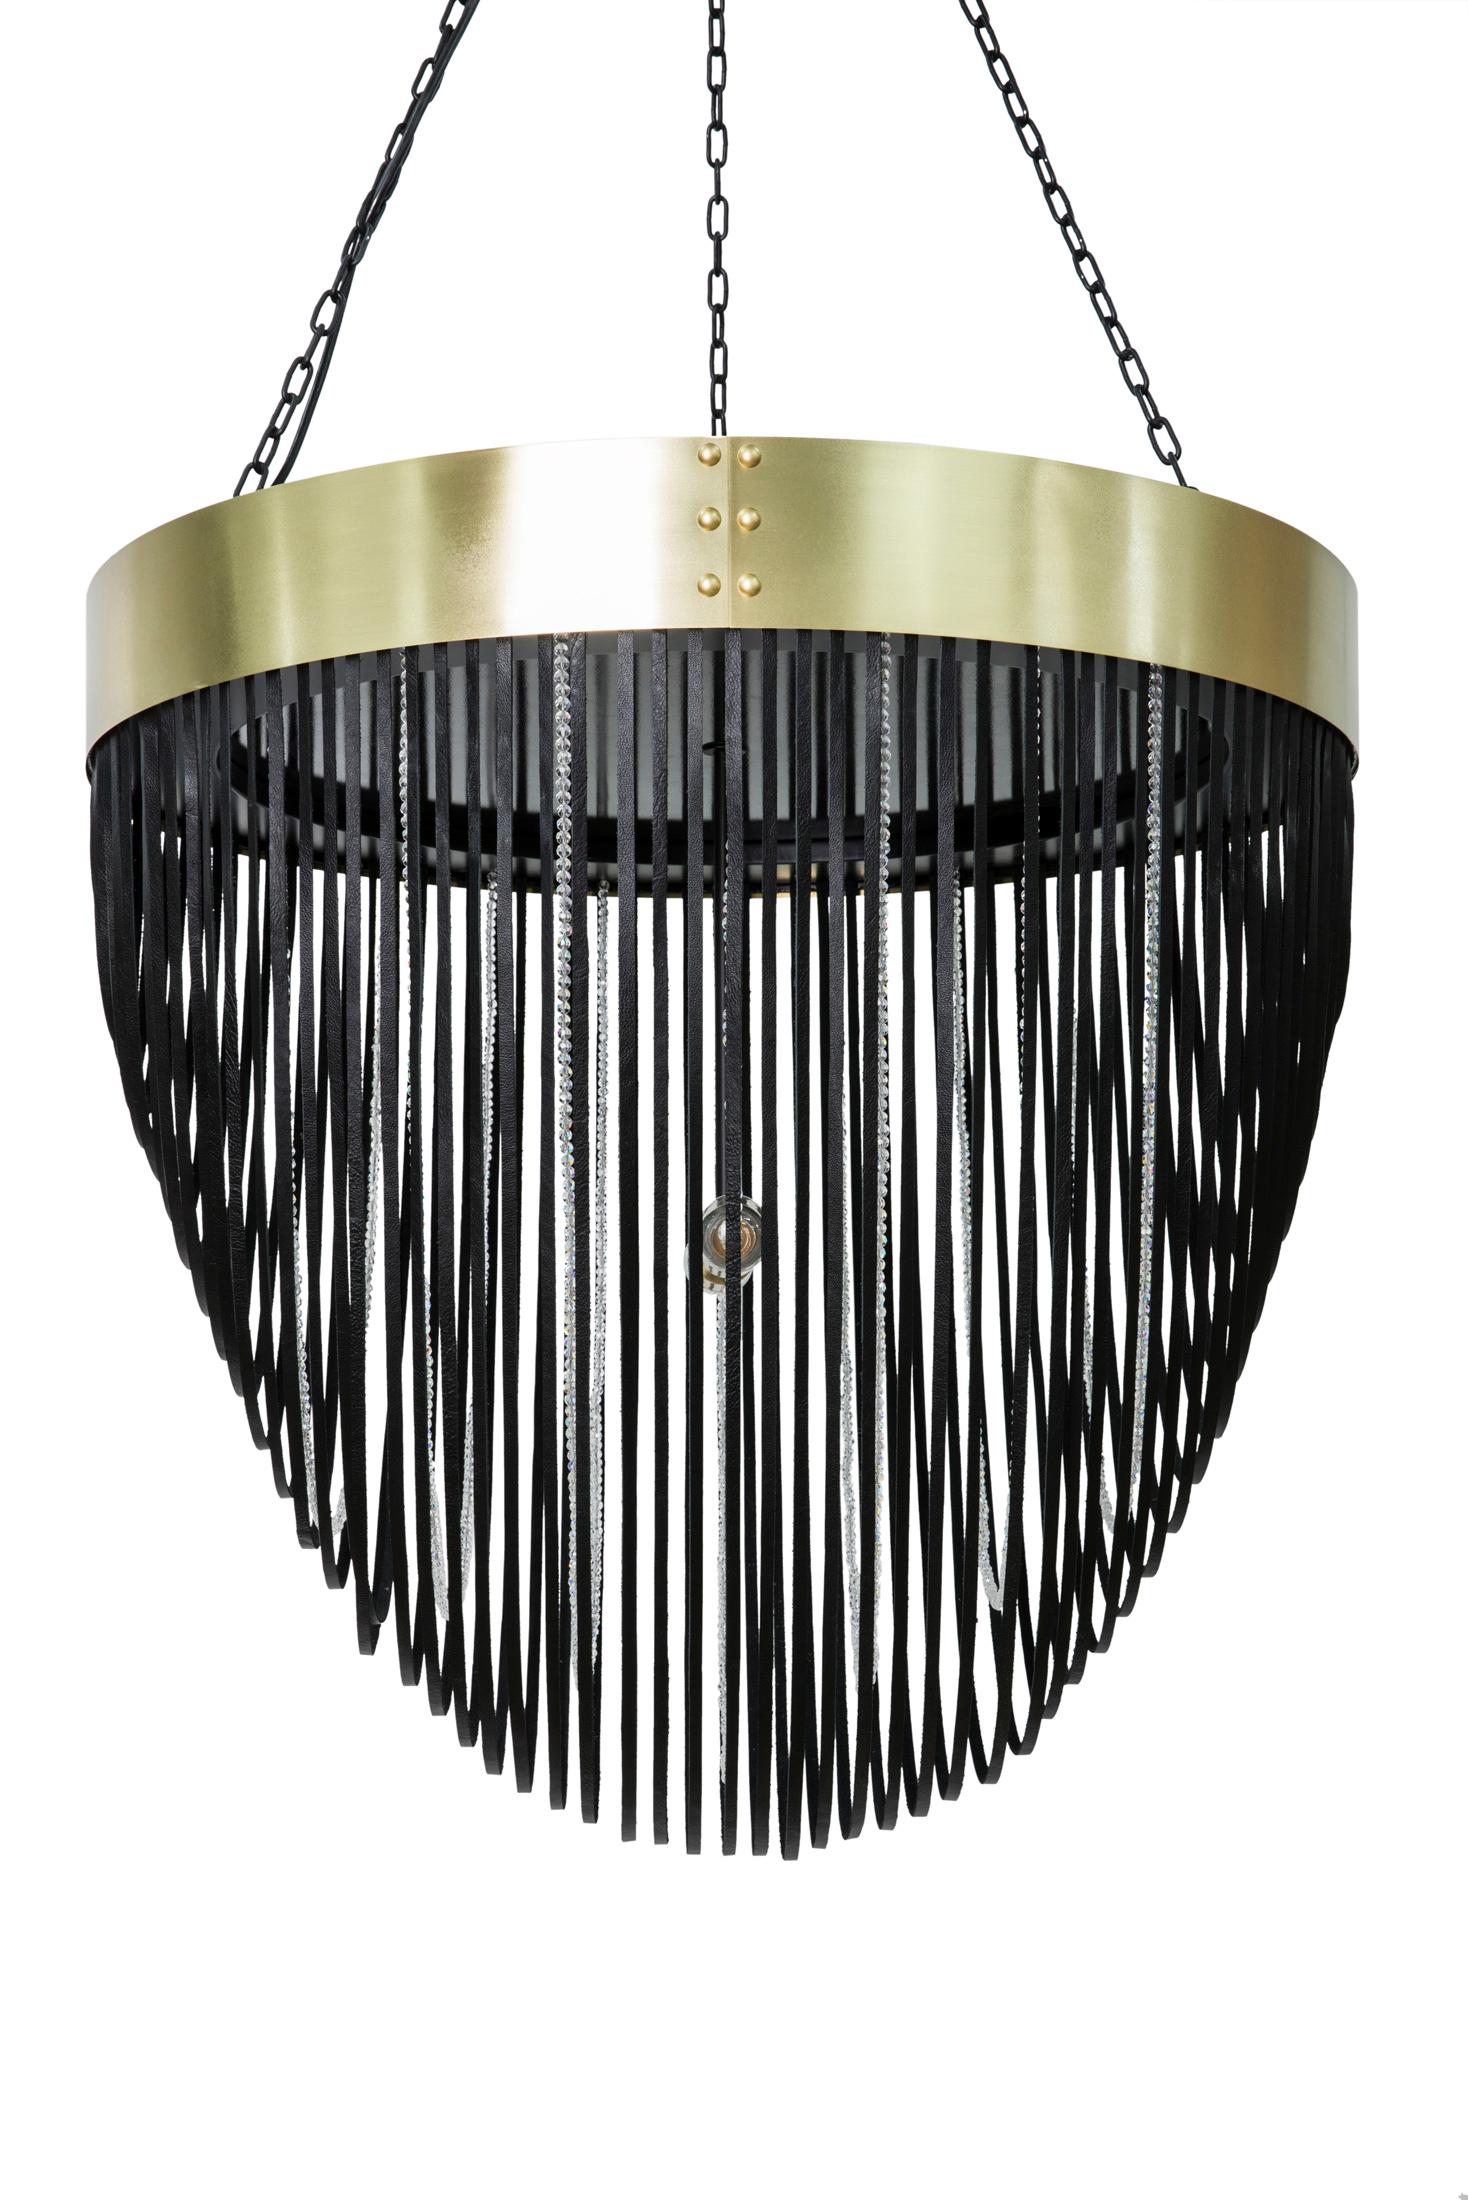 The Romantic pendant features parabolic drops of hand- stripped midnight-black leather and faceted glass beads beneath a brass ring, setting a contemporary tone in any residential or commercial space. 

All hard-wired lighting is UL-listed for dry